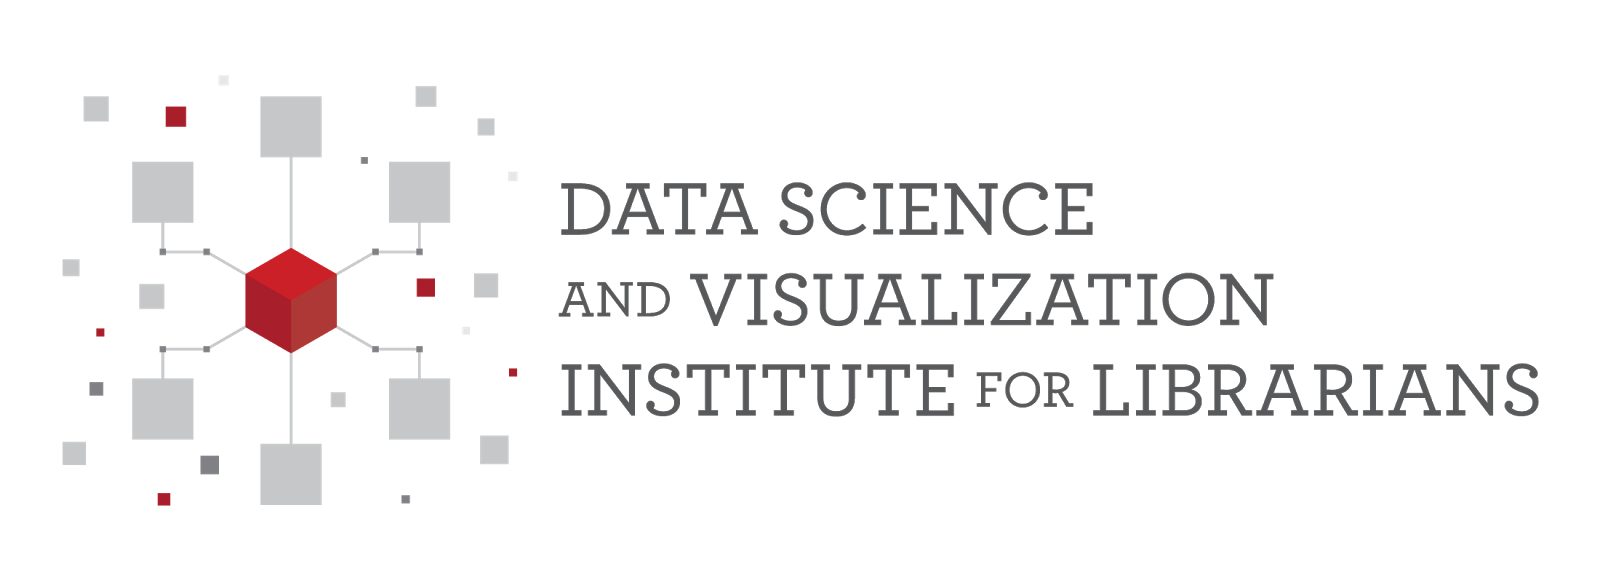 Data Science and Visualization Institute for Librarians